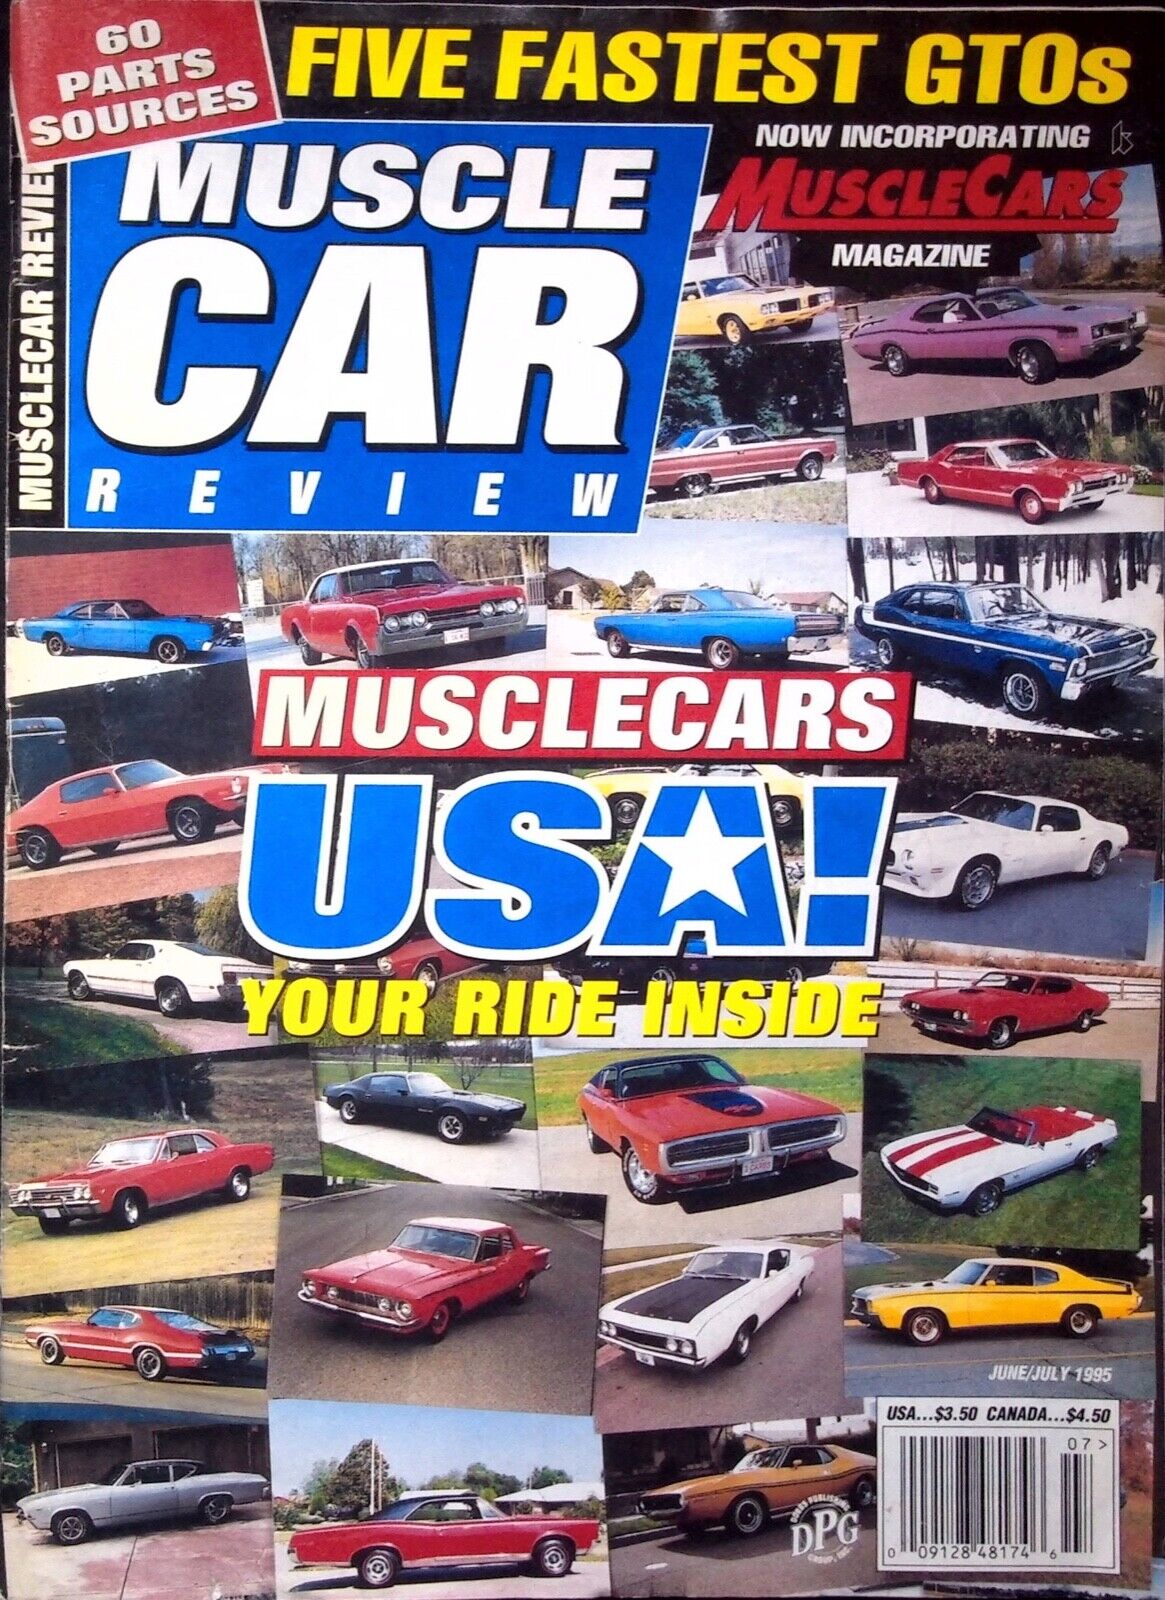 MUSCLE CAR REVIEW MAGAZINE FIVE FASTEST GTOS JUNE/JULY 1995